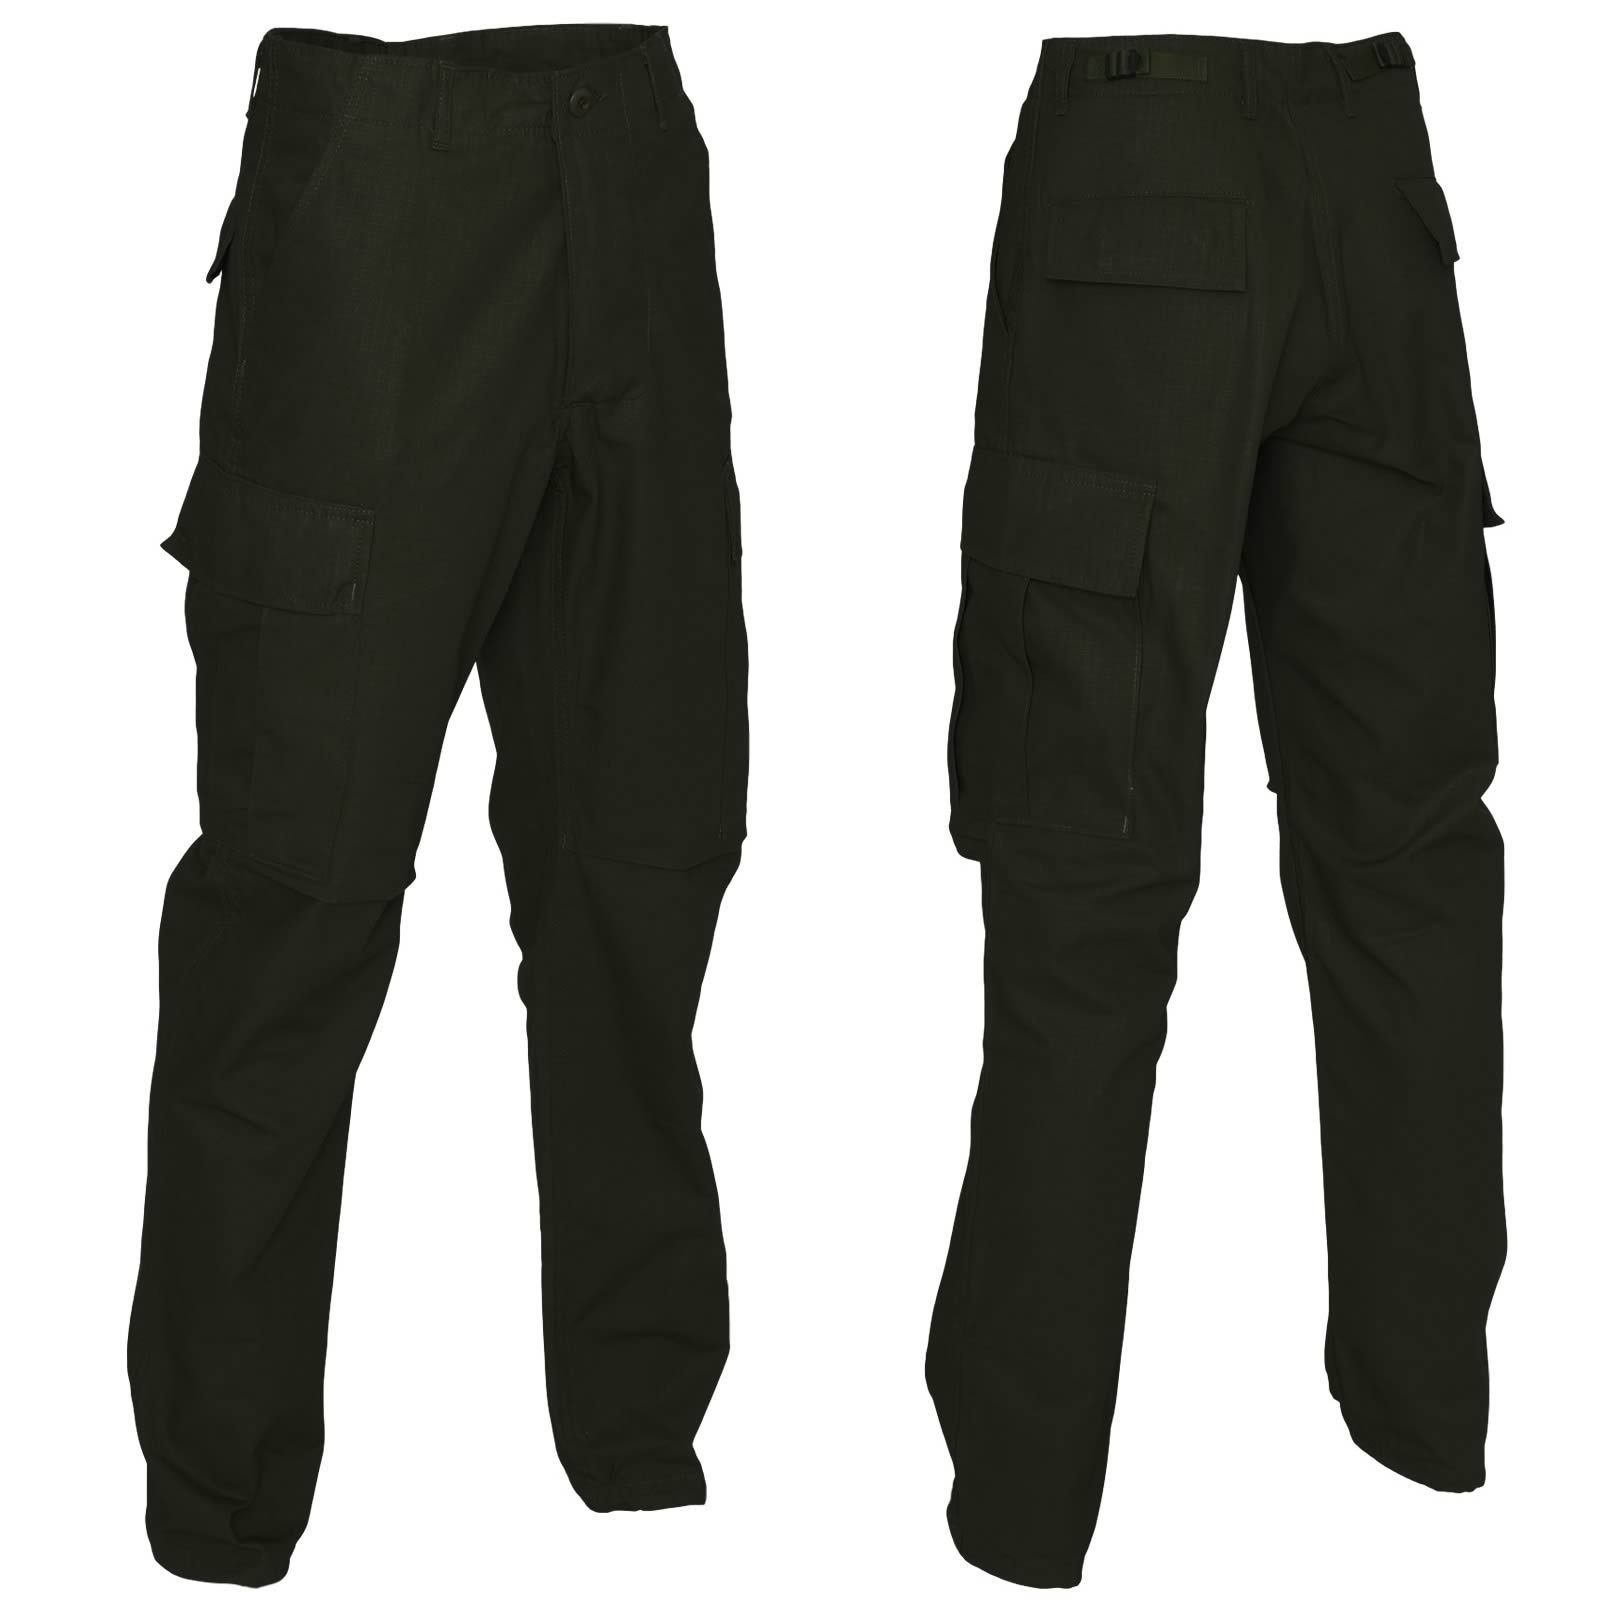 Tru-Spec BDU Ripstop Combat Trousers US Army Military Tactical Security ...